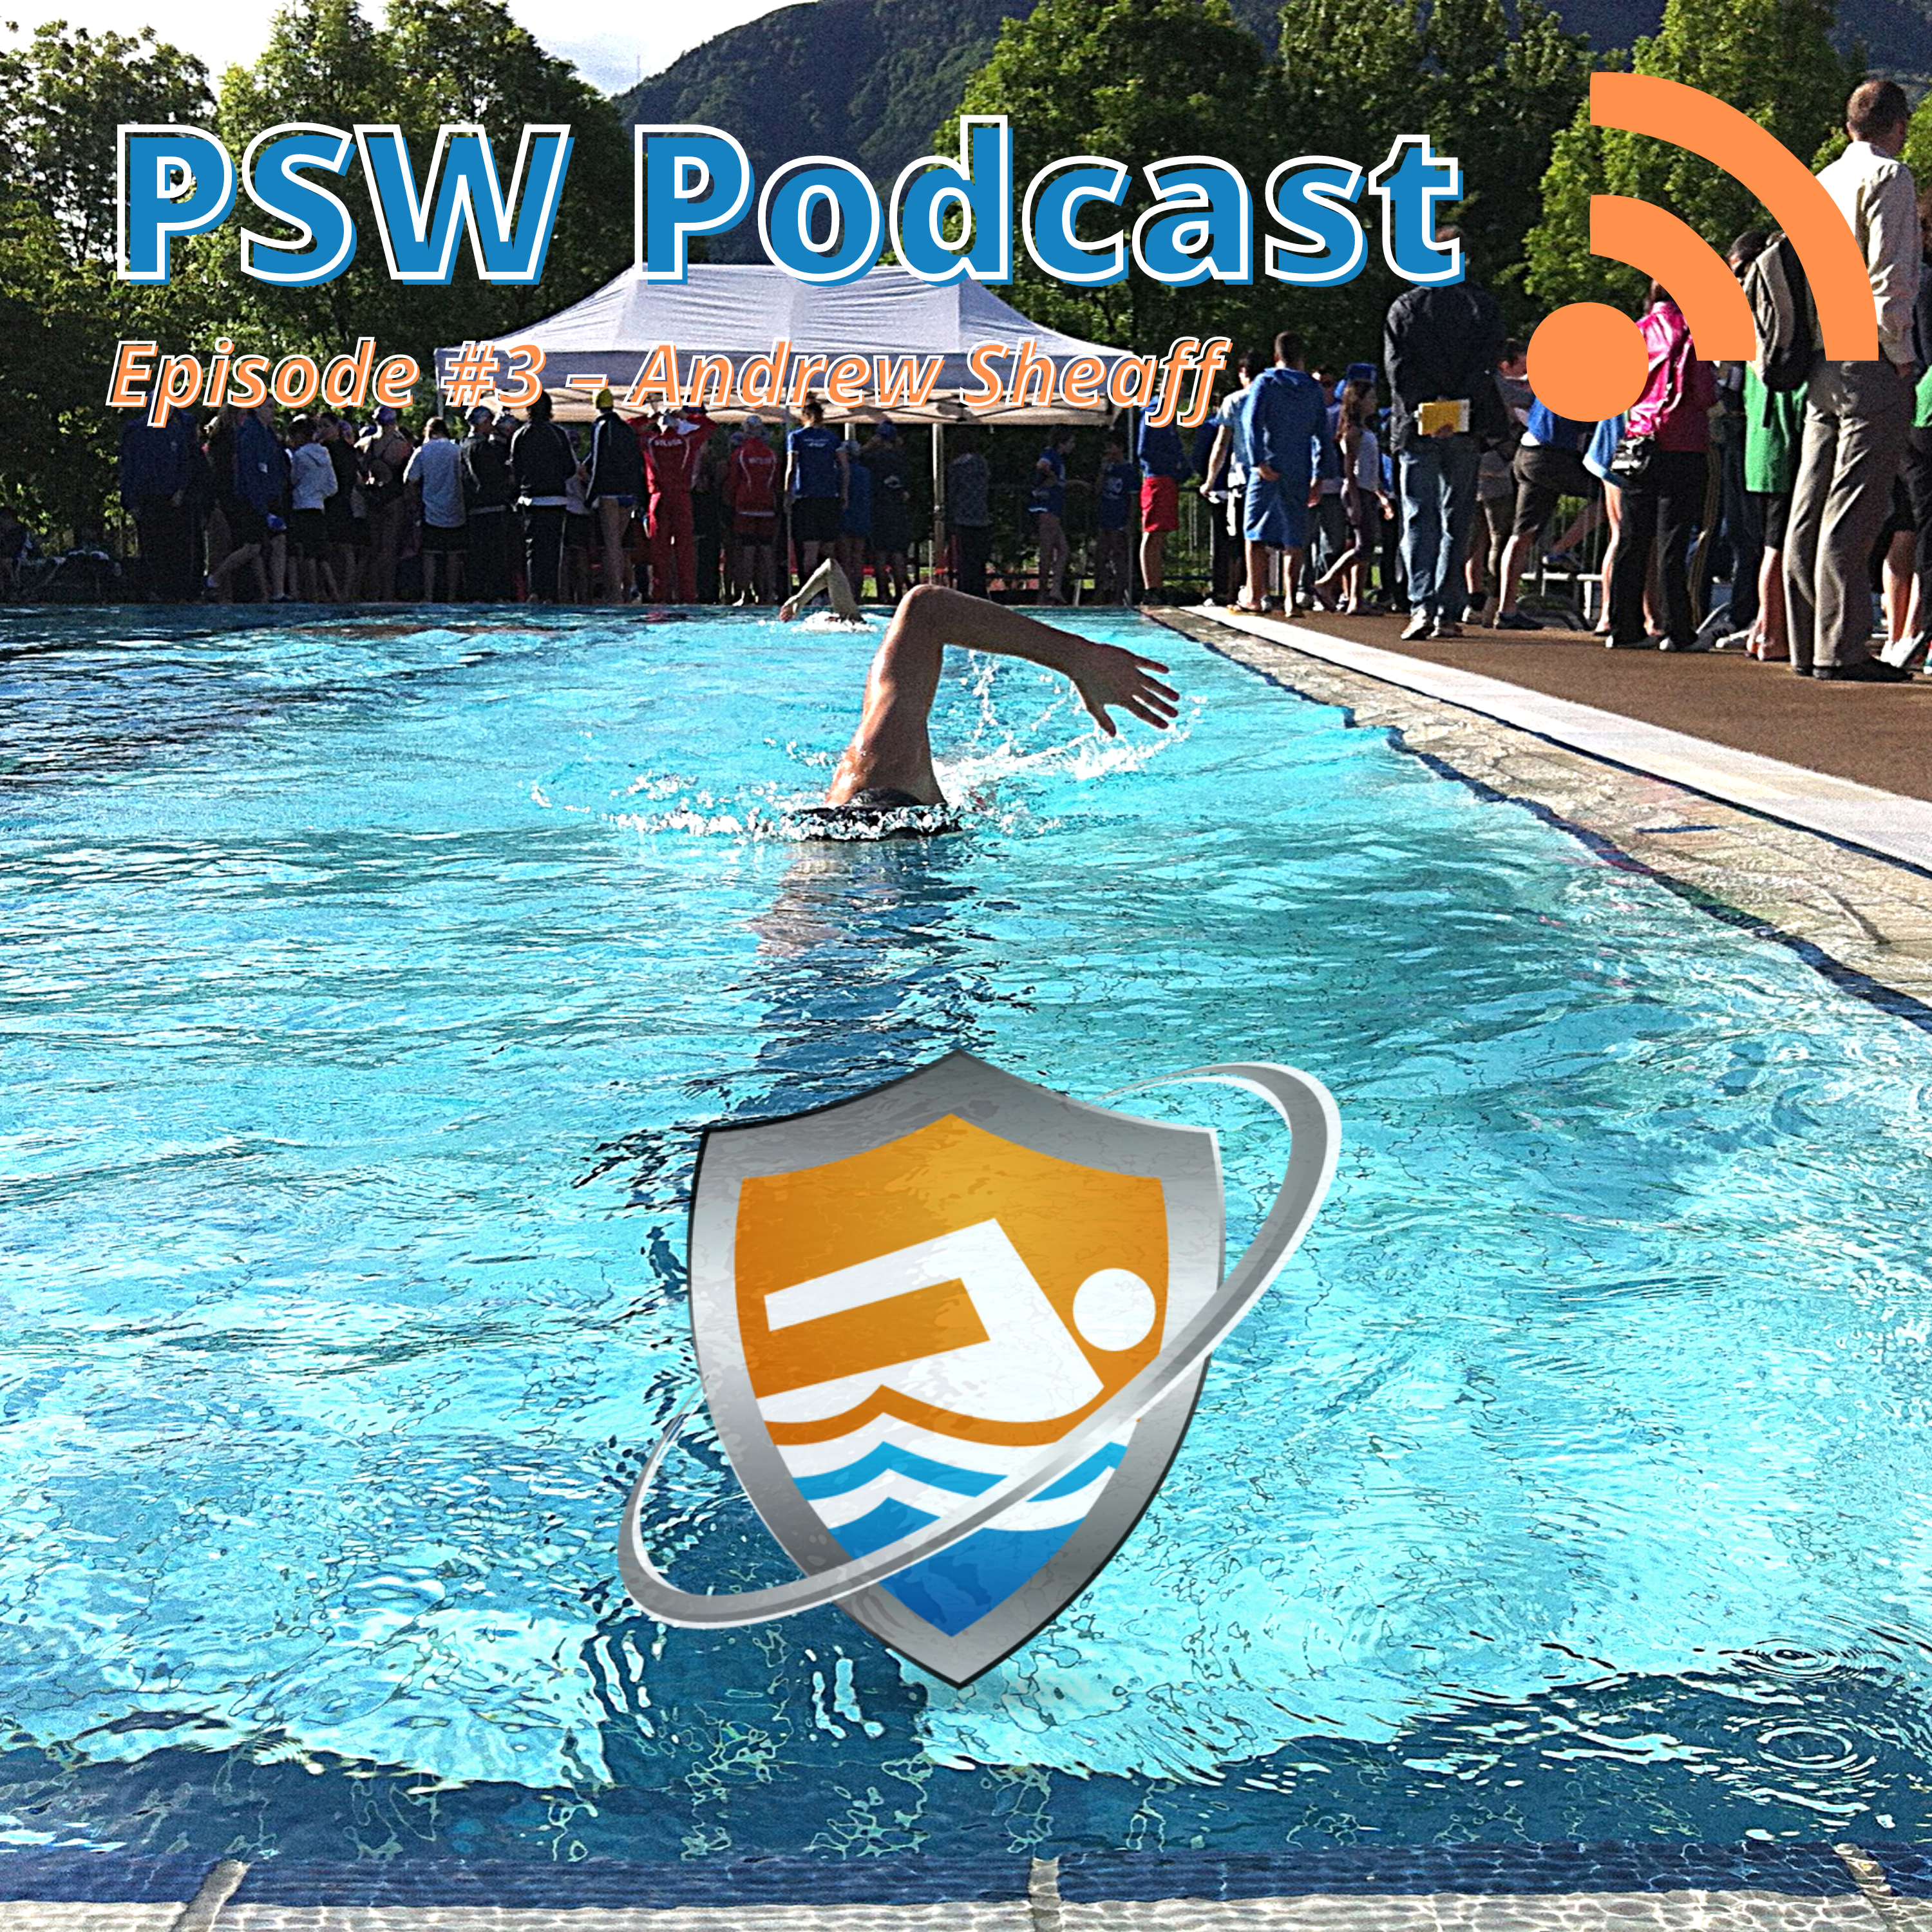 PSW Podcast – Episode 3 – Andrew Sheaff – Part 2